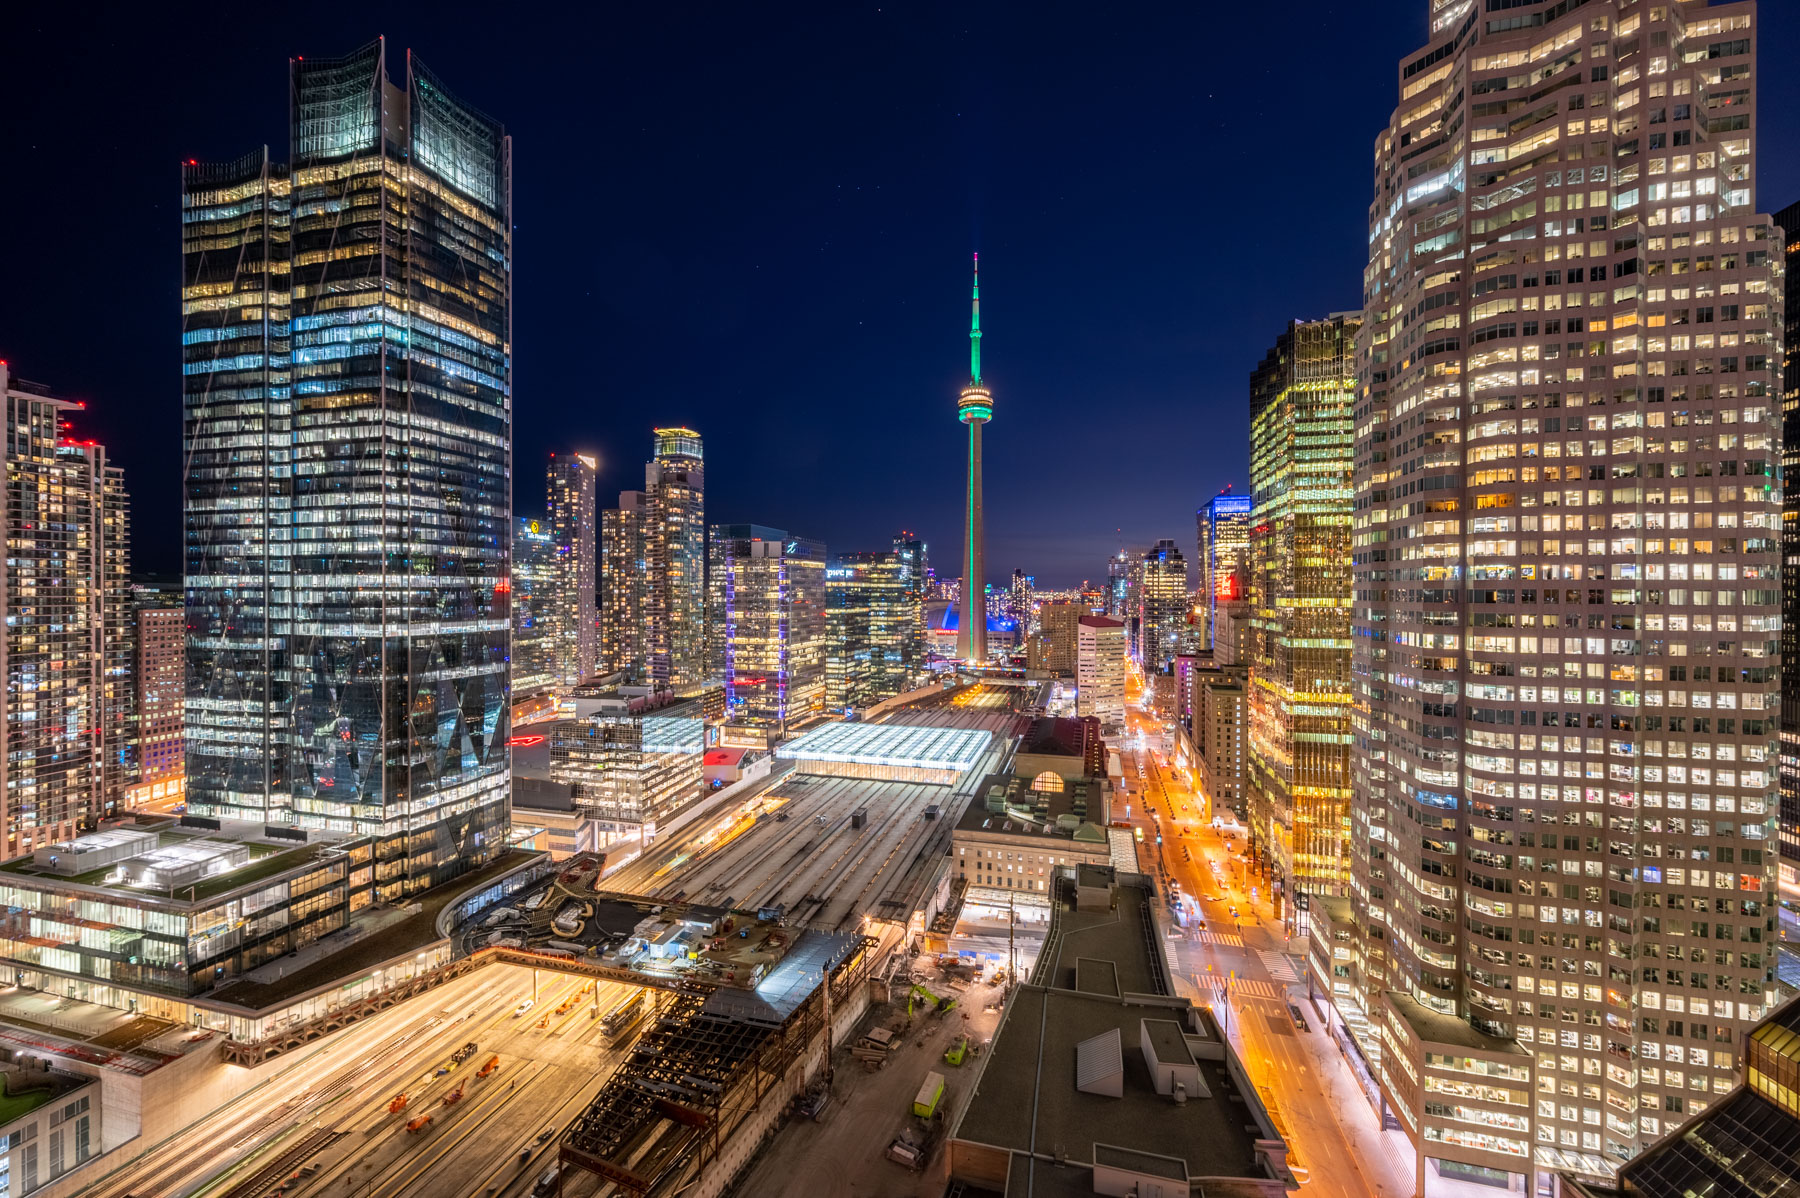 Brightly lit CN Tower and Toronto skyline at night.